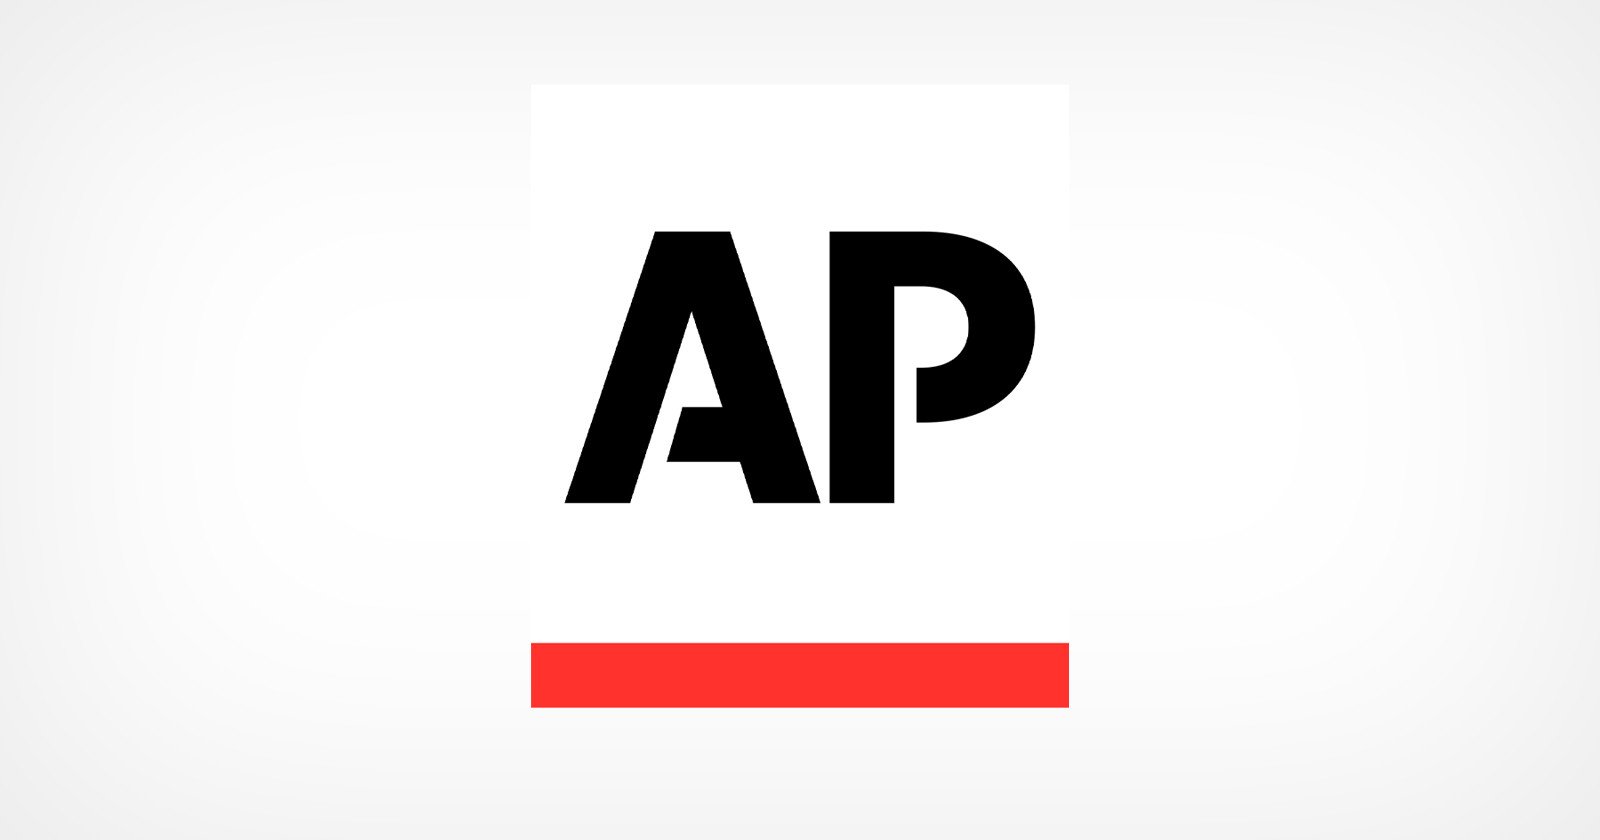 AP Cancels NFT Sale Amid Criticisms it Would Be Profiting From Suffering